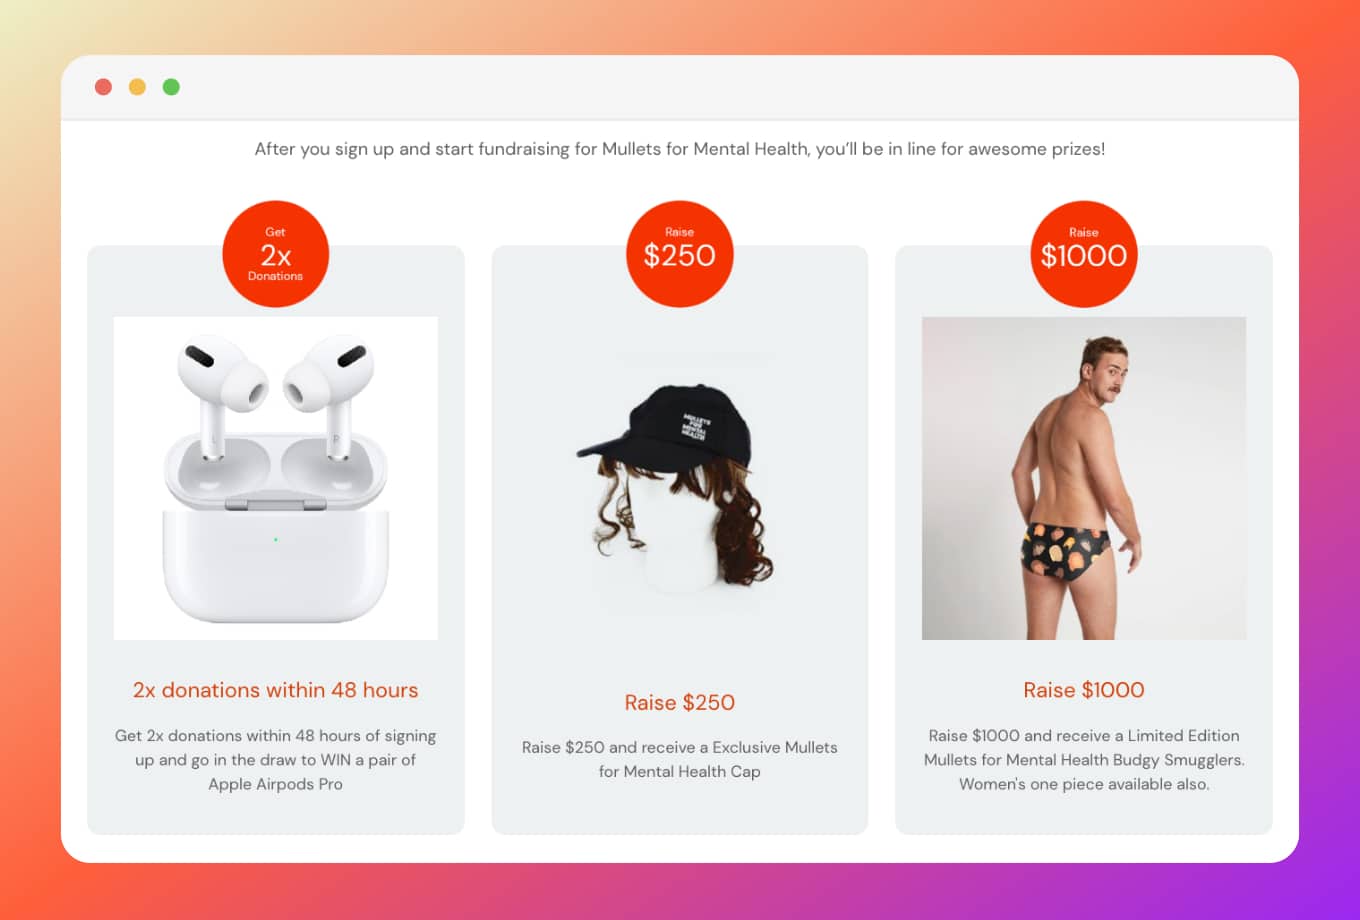 Rewards include AirPods, a Mullets or Mental Health hat, and a custom swimsuit